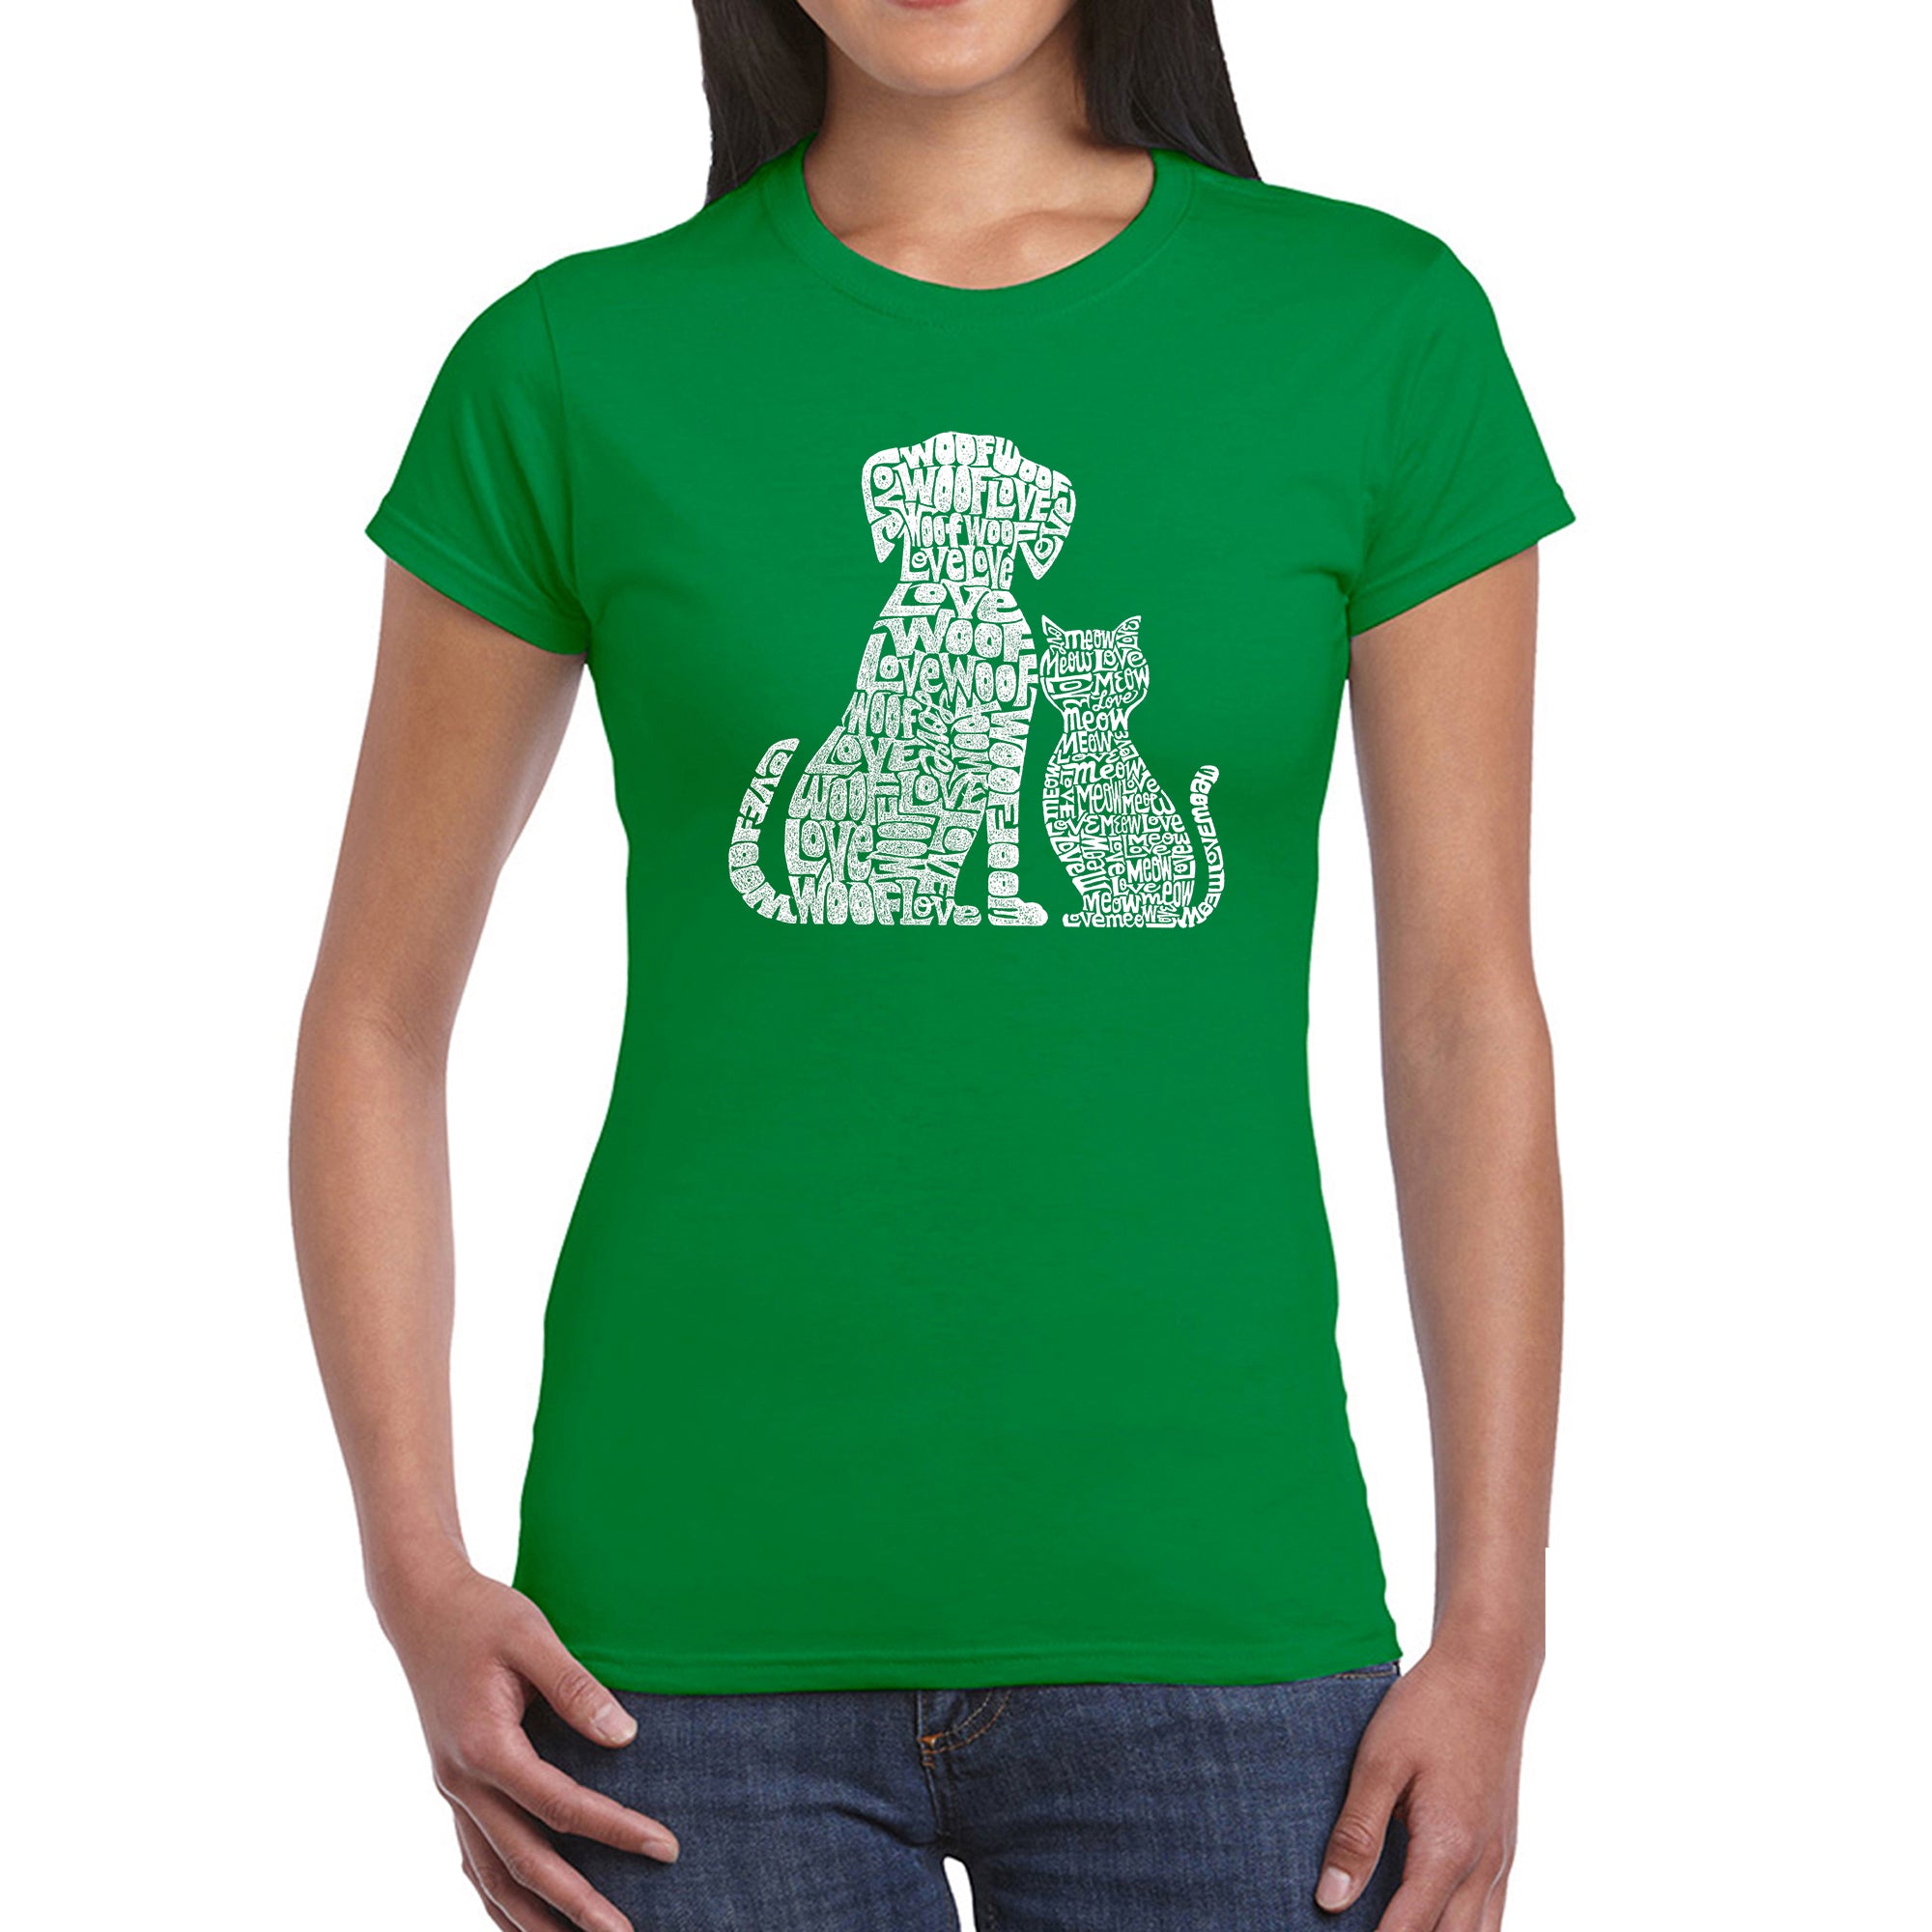 Dogs And Cats - Women's Word Art T-Shirt - Kelly - XX-Large